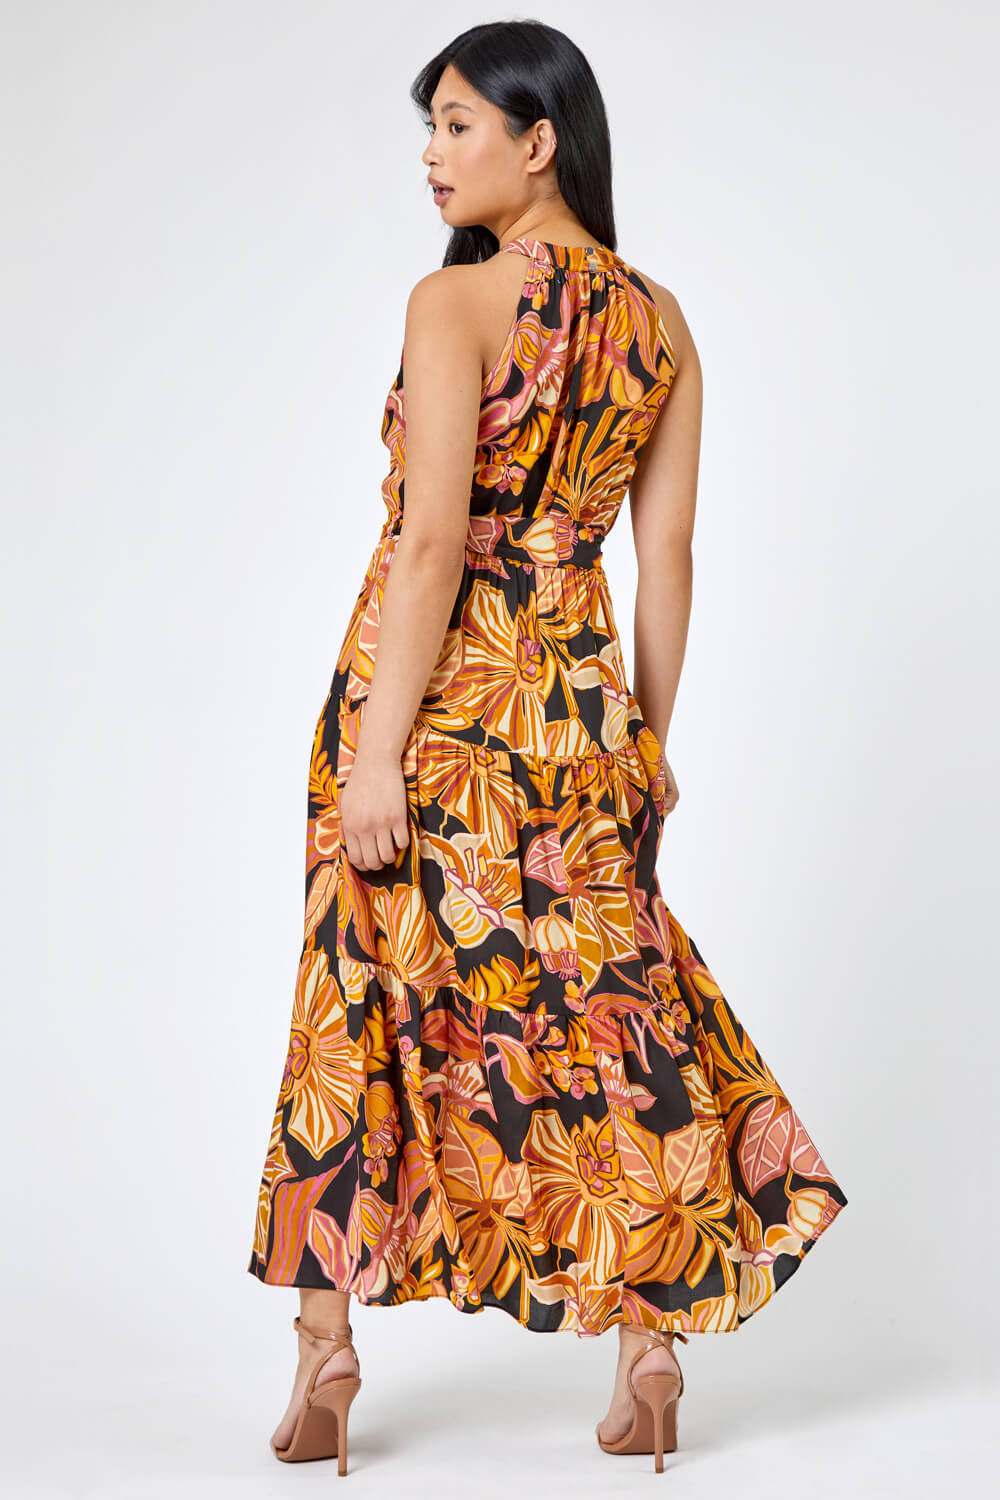 Rust Petite Floral Print Tiered Dress, Image 2 of 5